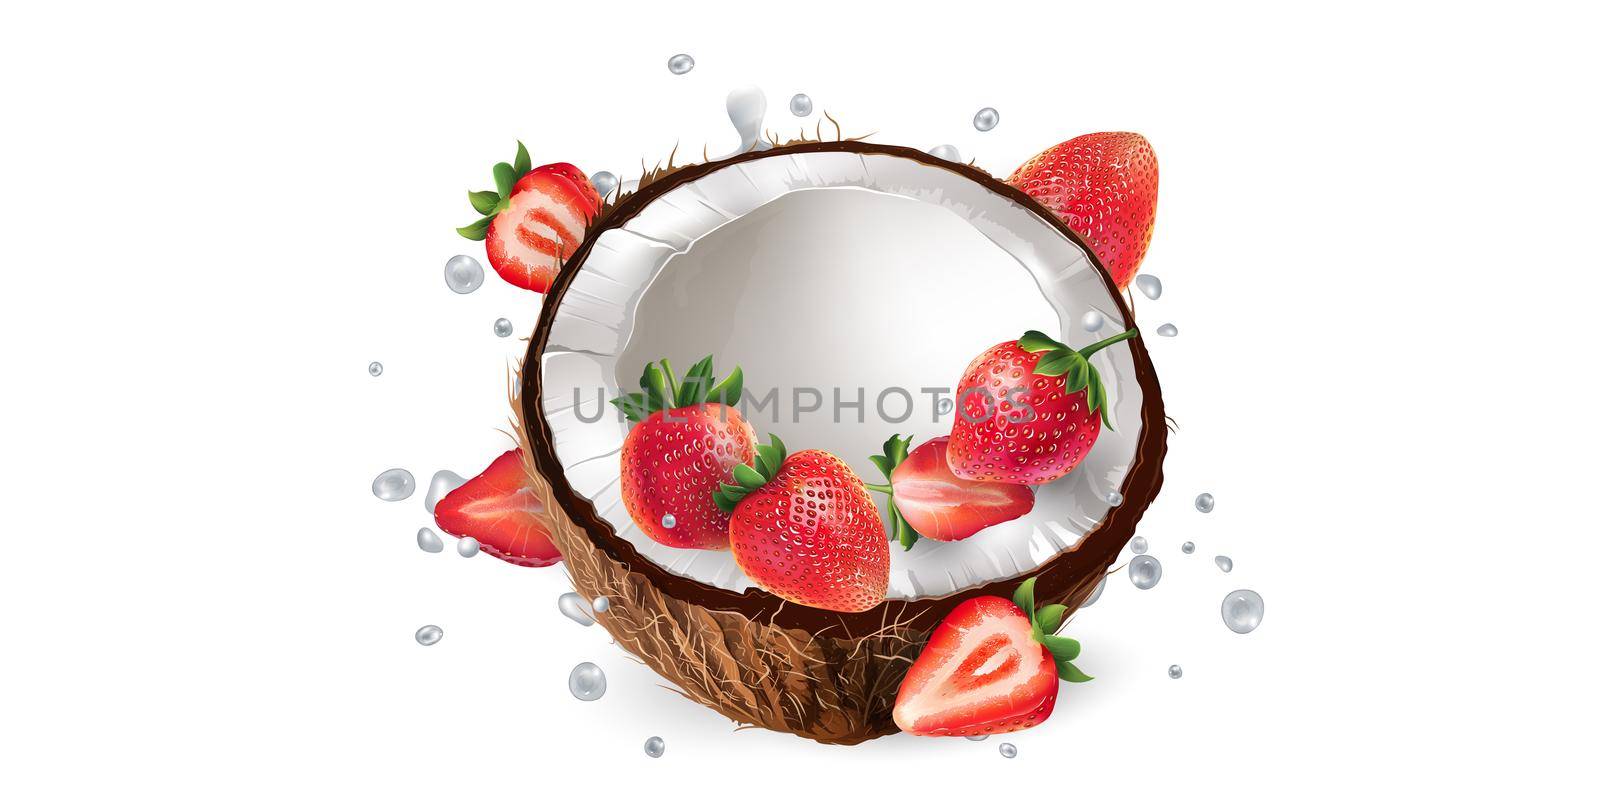 Half coconut and strawberries in milk splashes on a white background. Realistic style illustration.